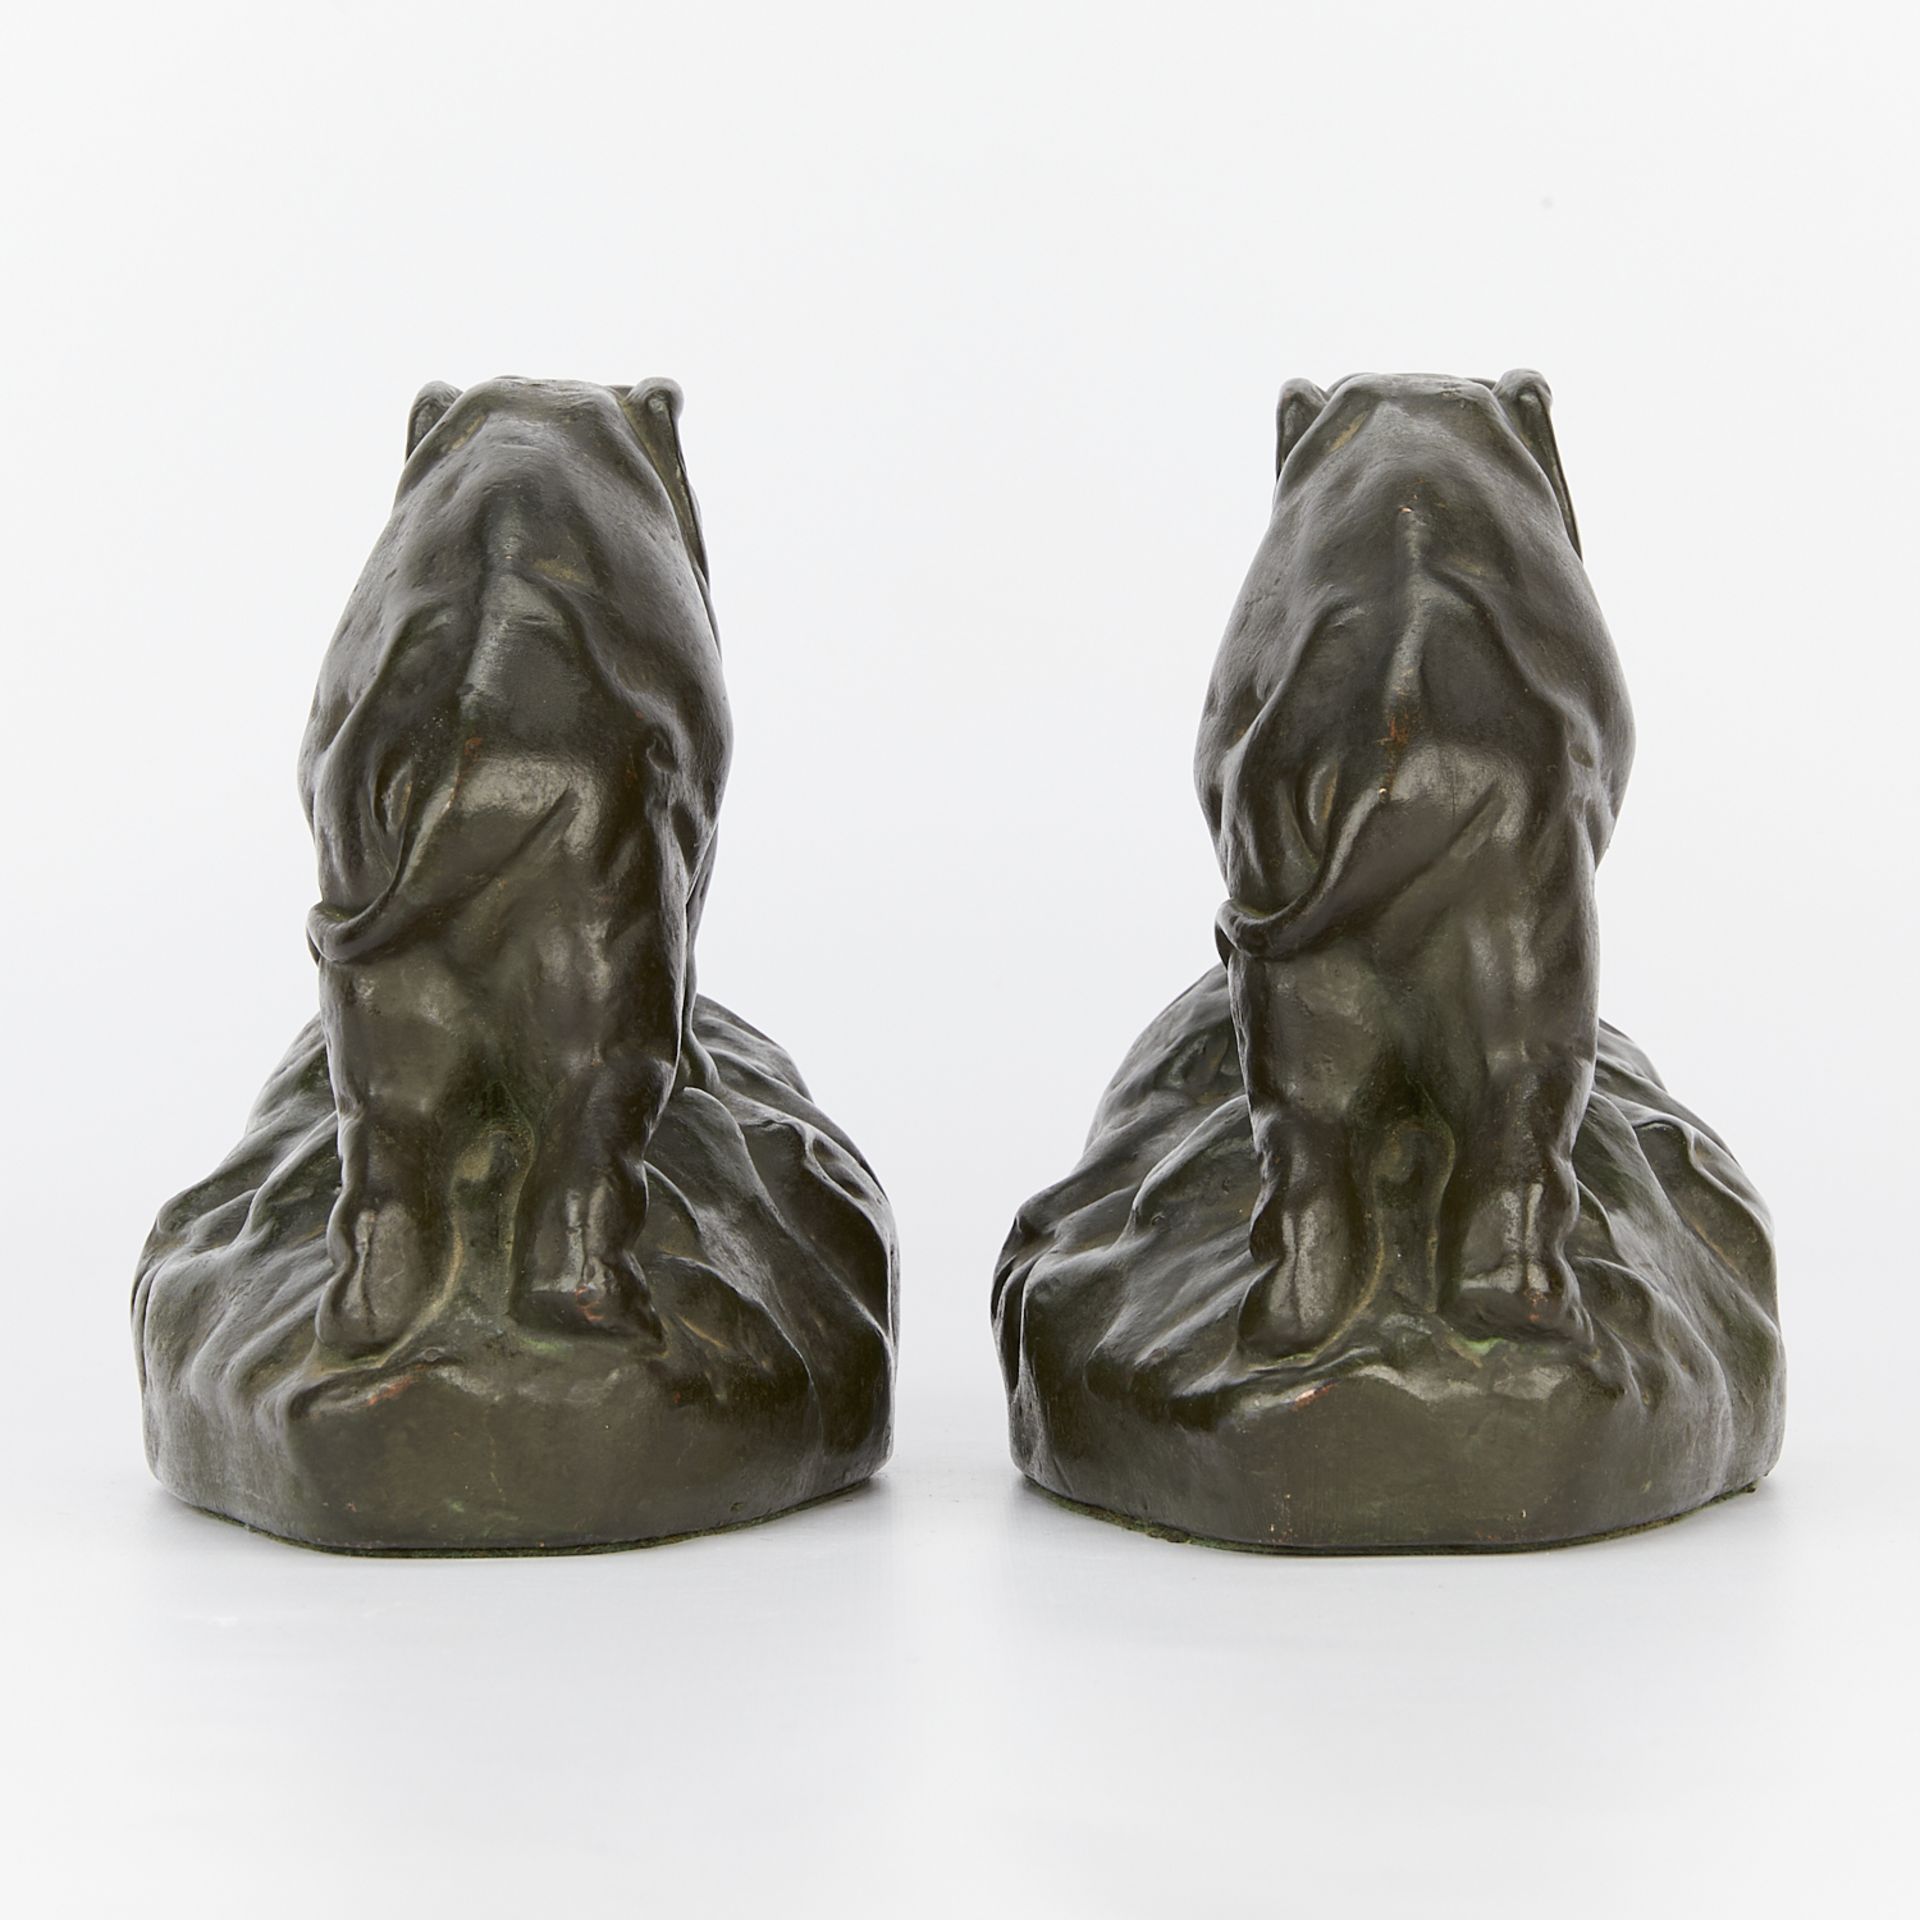 Pair of Bronze or Copper Elephant Bookends - Image 5 of 11